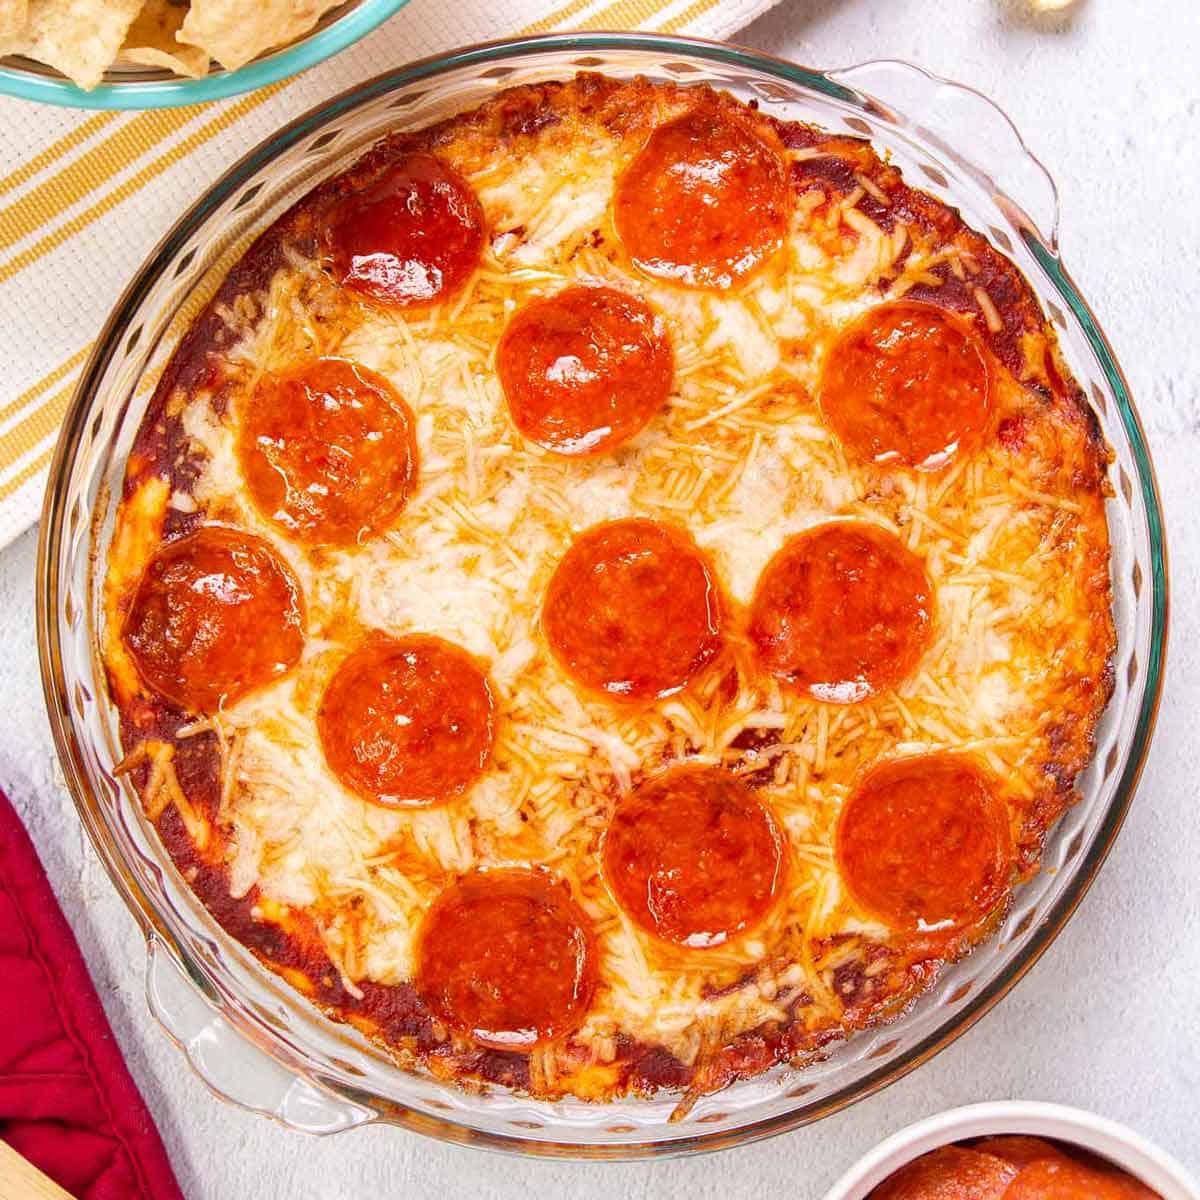 Top down view of pizza dip baked in a pie plate. The dip is topped with pepperoni.